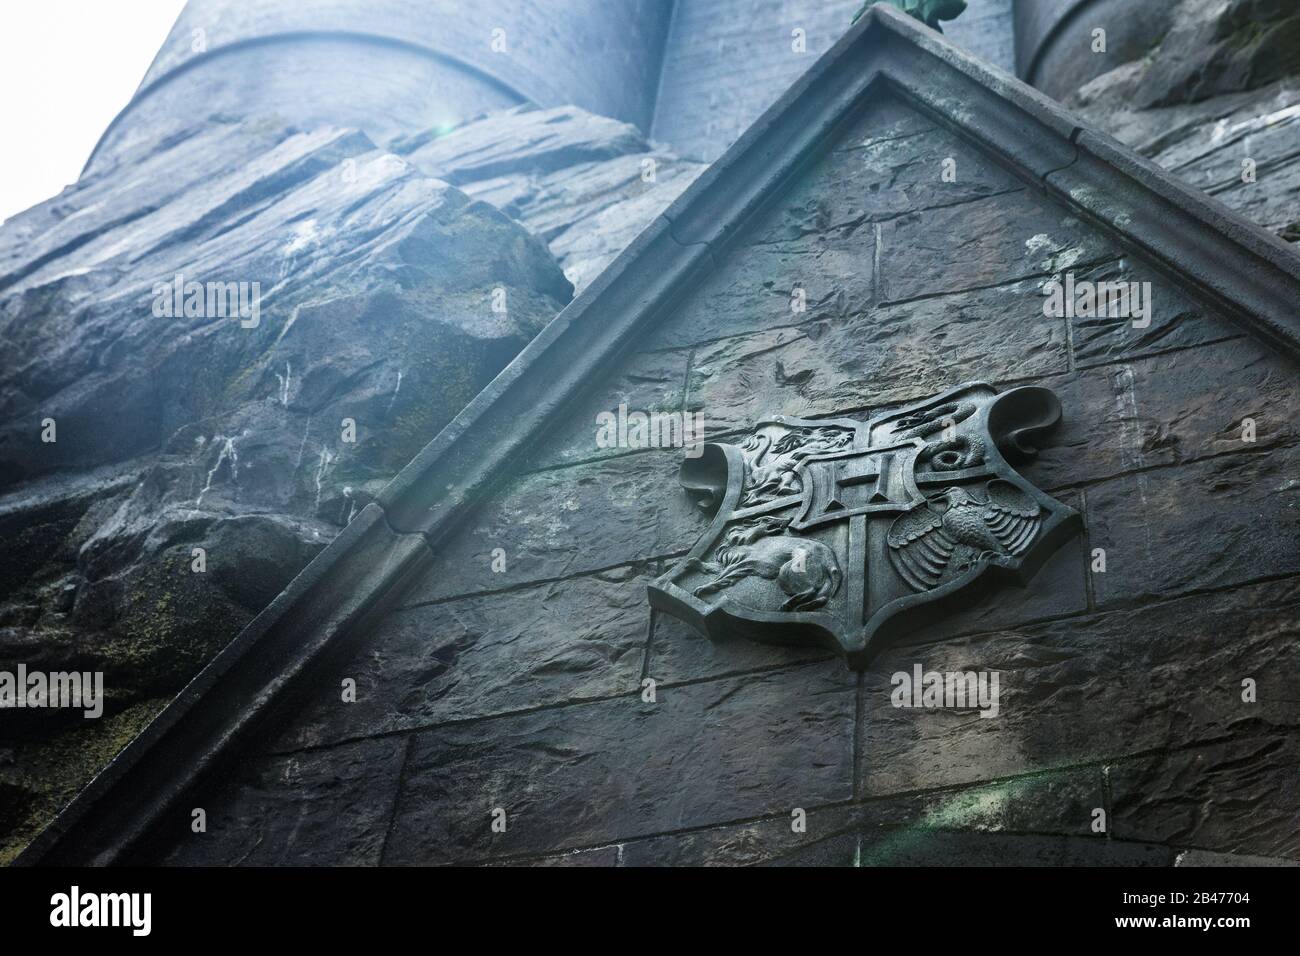 Hogwarts School of Witchcraft and Wizardry coat of Arms, Universal Studios Orlando (The Wizarding World of Harry Potter), Florida. Bellissimo angolo basso Foto Stock